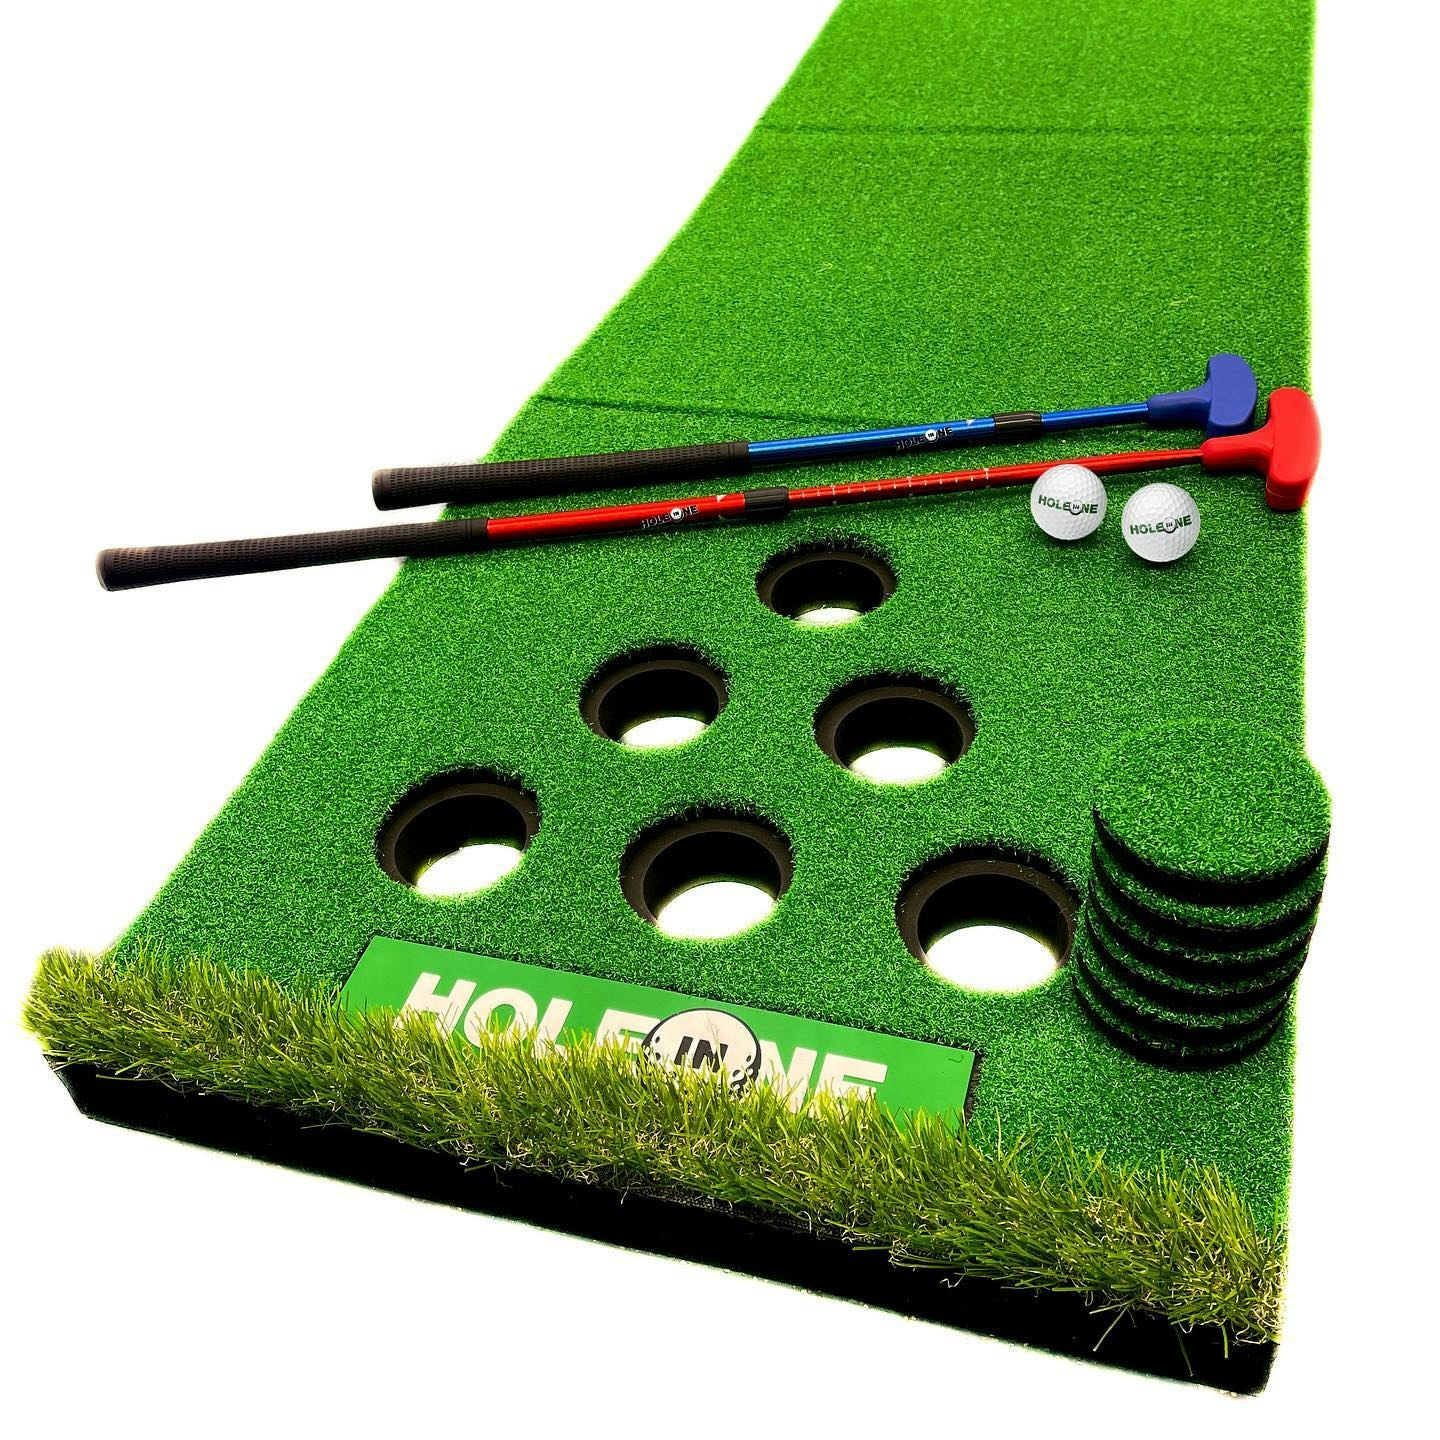 Hole-In-One Spillet